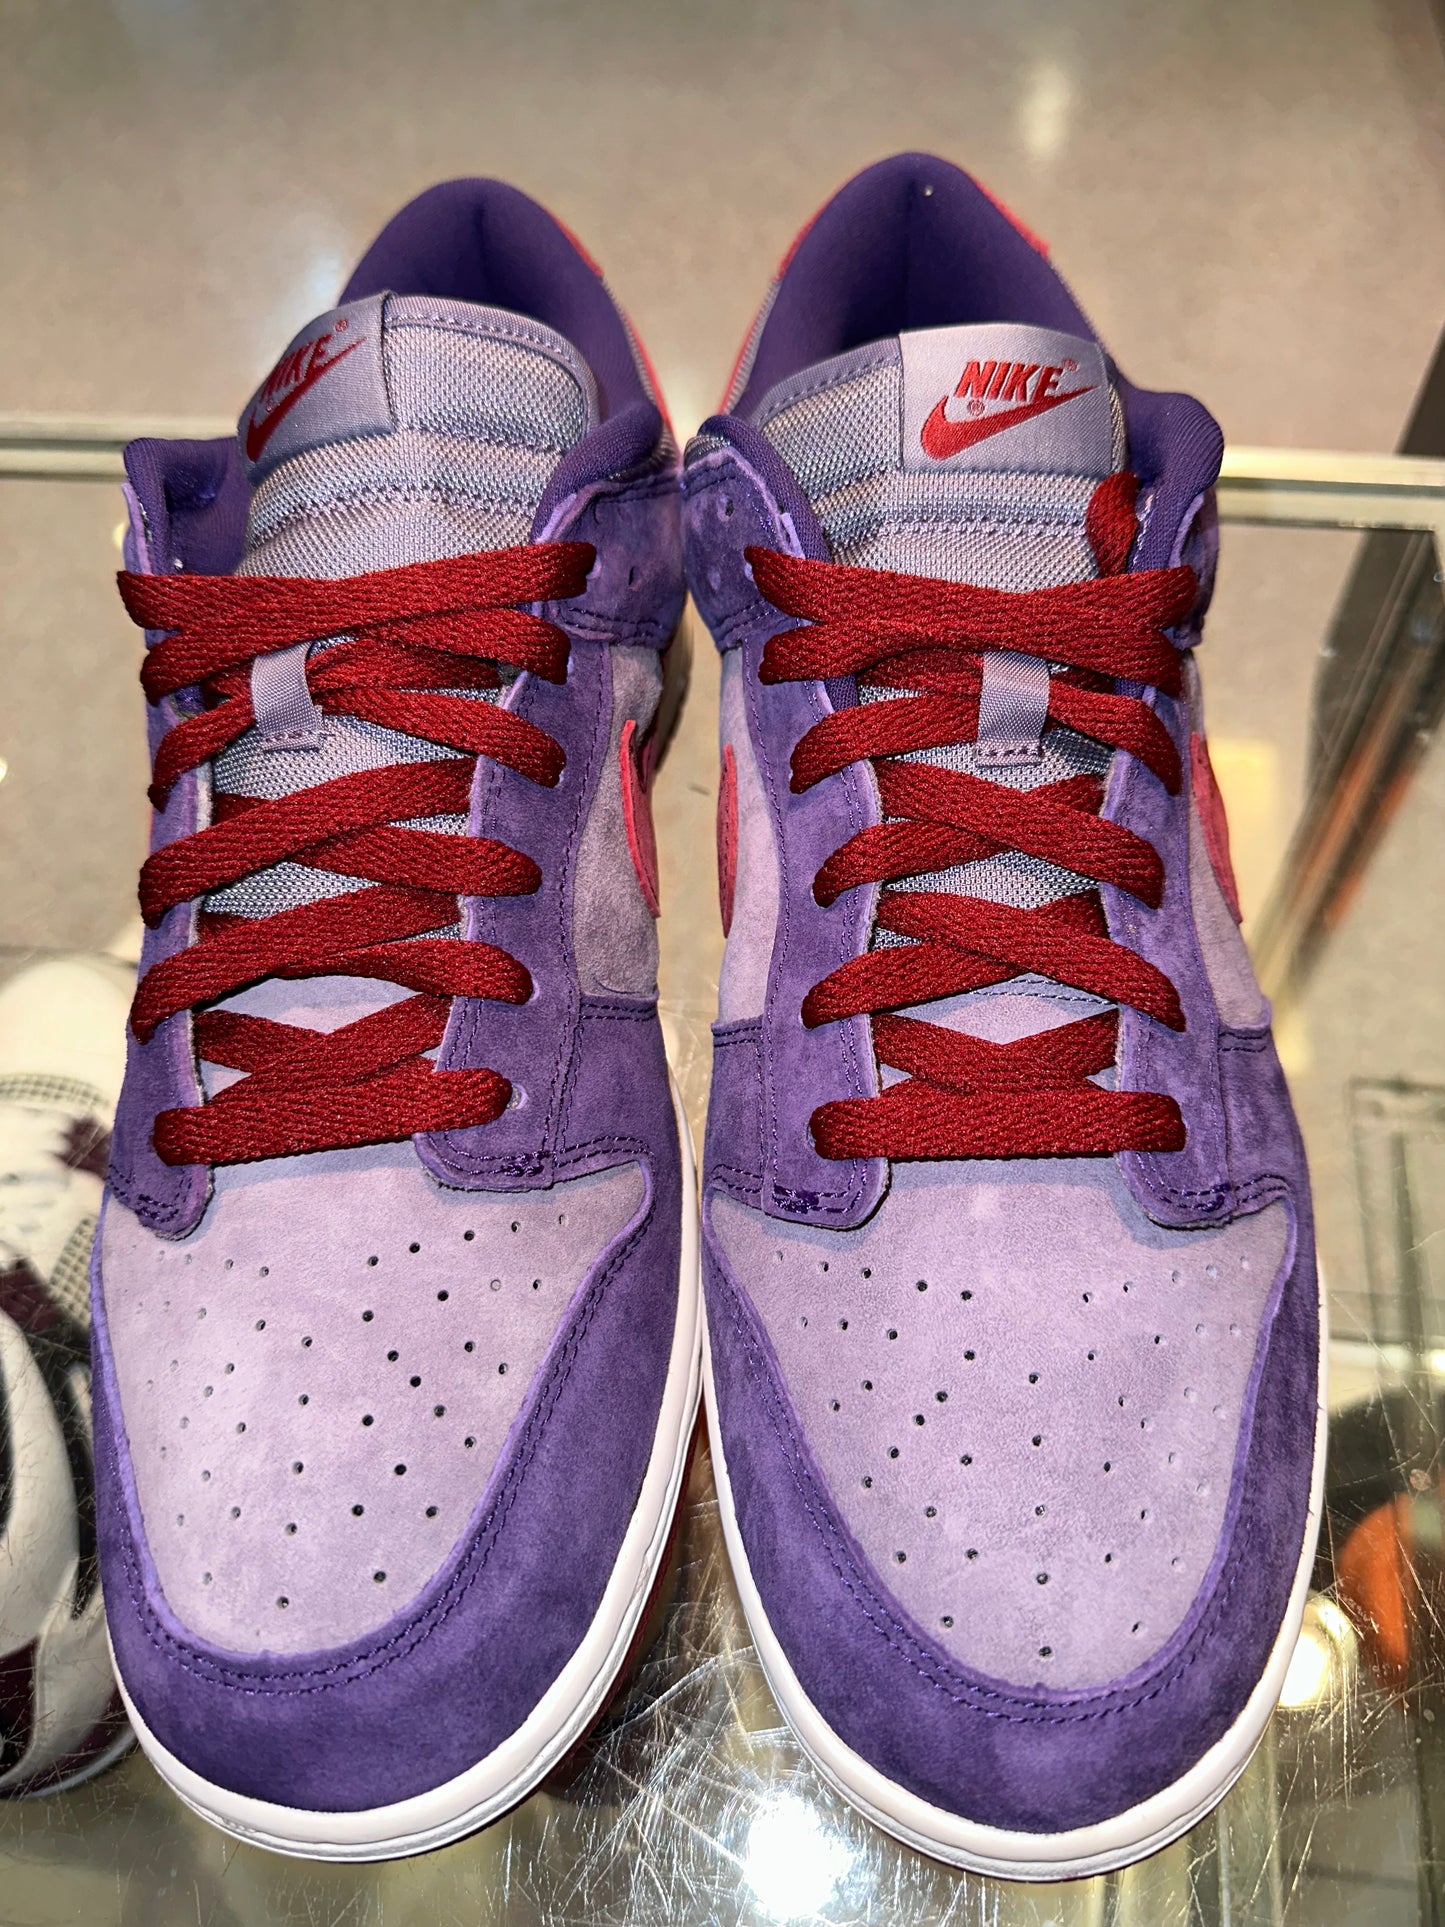 Size 11 Dunk Low “Plum” Brand New (Mall)